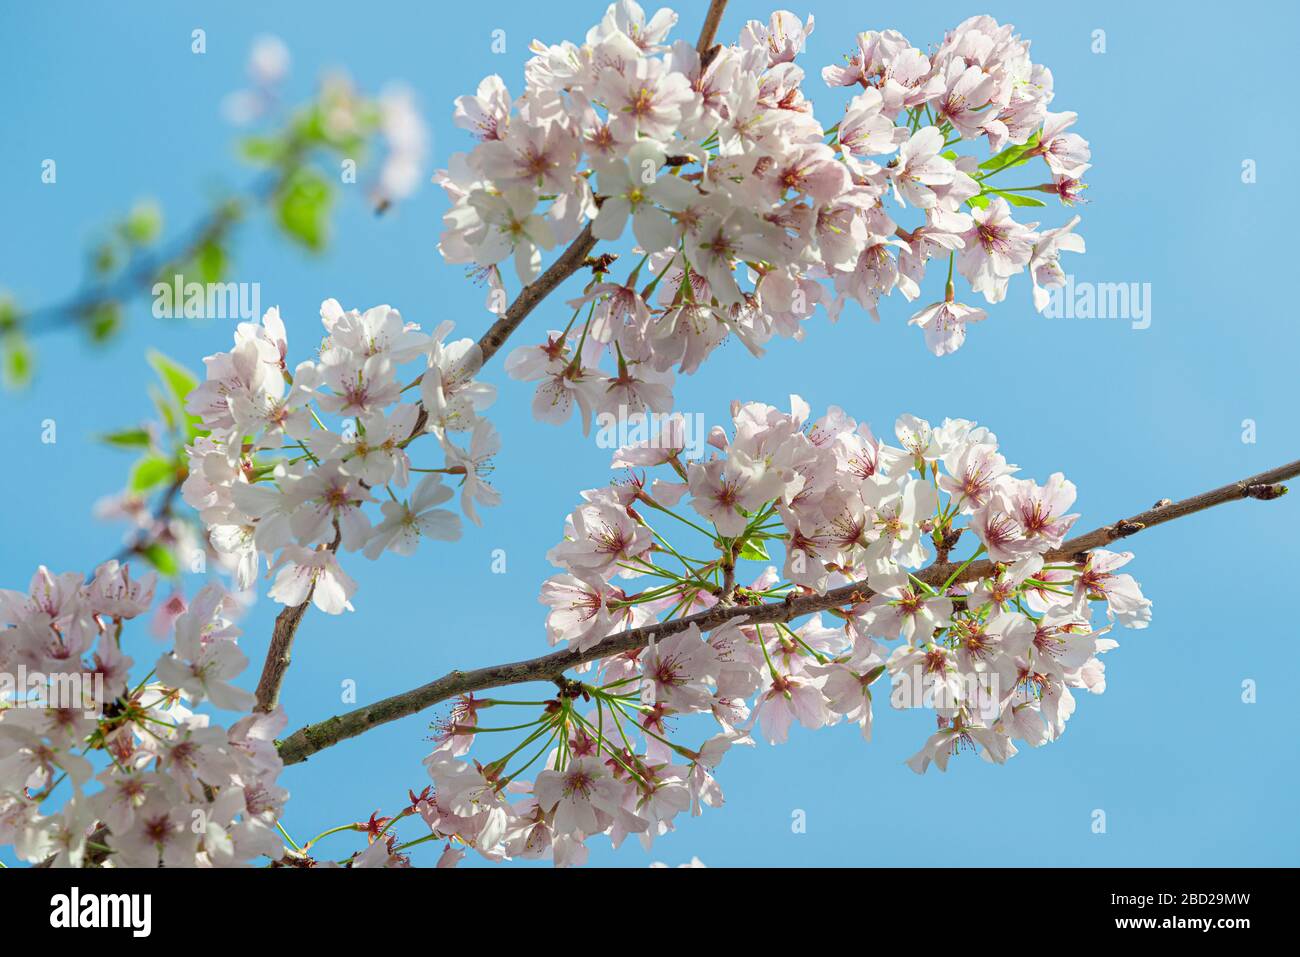 Horizontal close-up shot of flowering blooms on a Bradford Pear Tree. Stock Photo